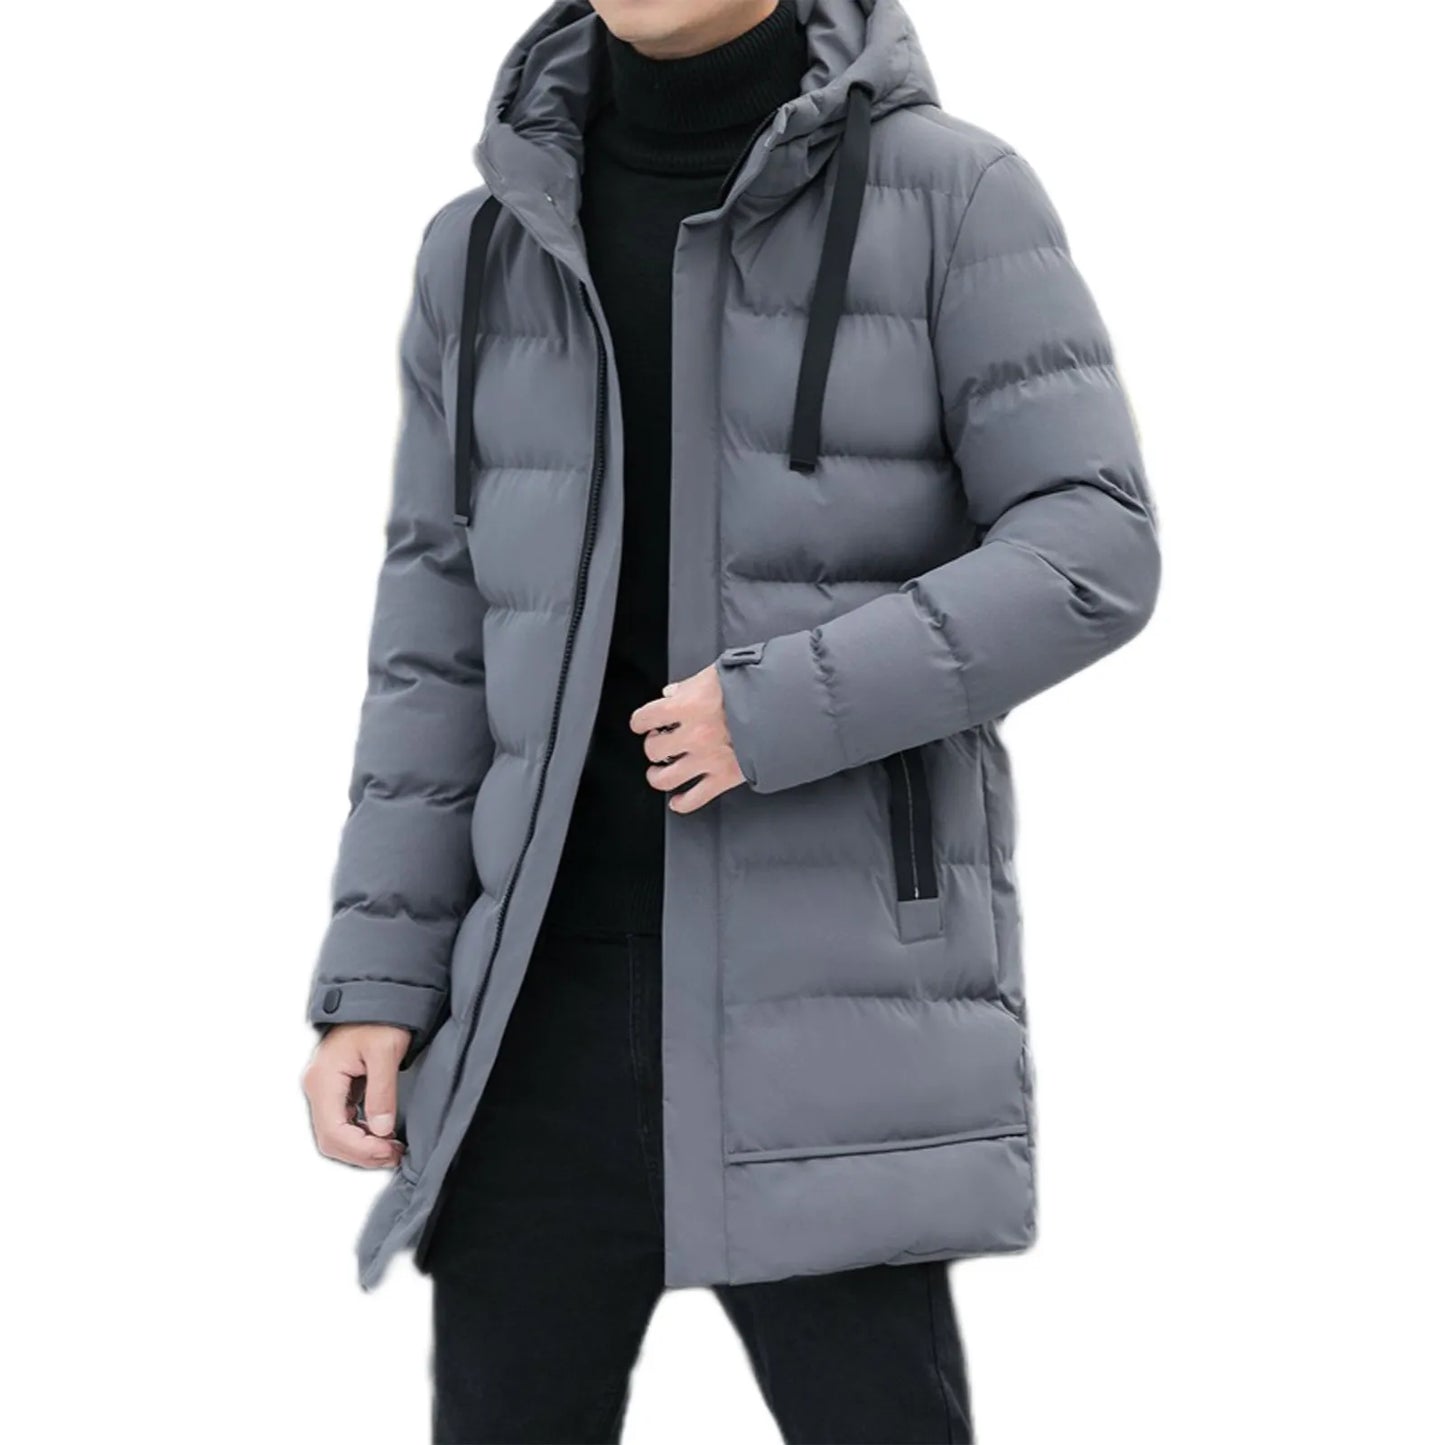 Brand Hooded Casual Fashion Long Thicken Outwear Parkas Jacket